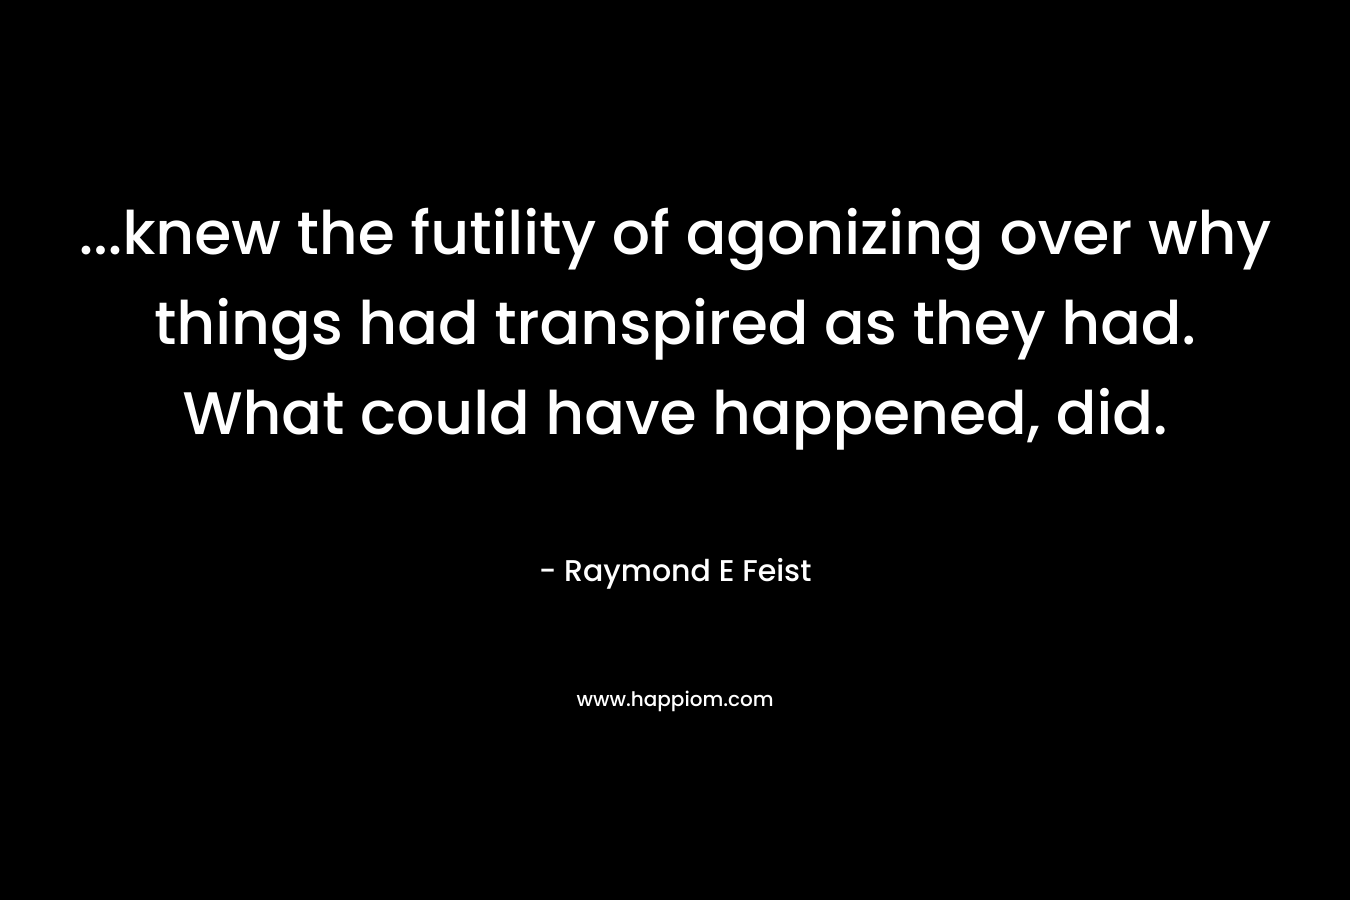 …knew the futility of agonizing over why things had transpired as they had. What could have happened, did. – Raymond E Feist